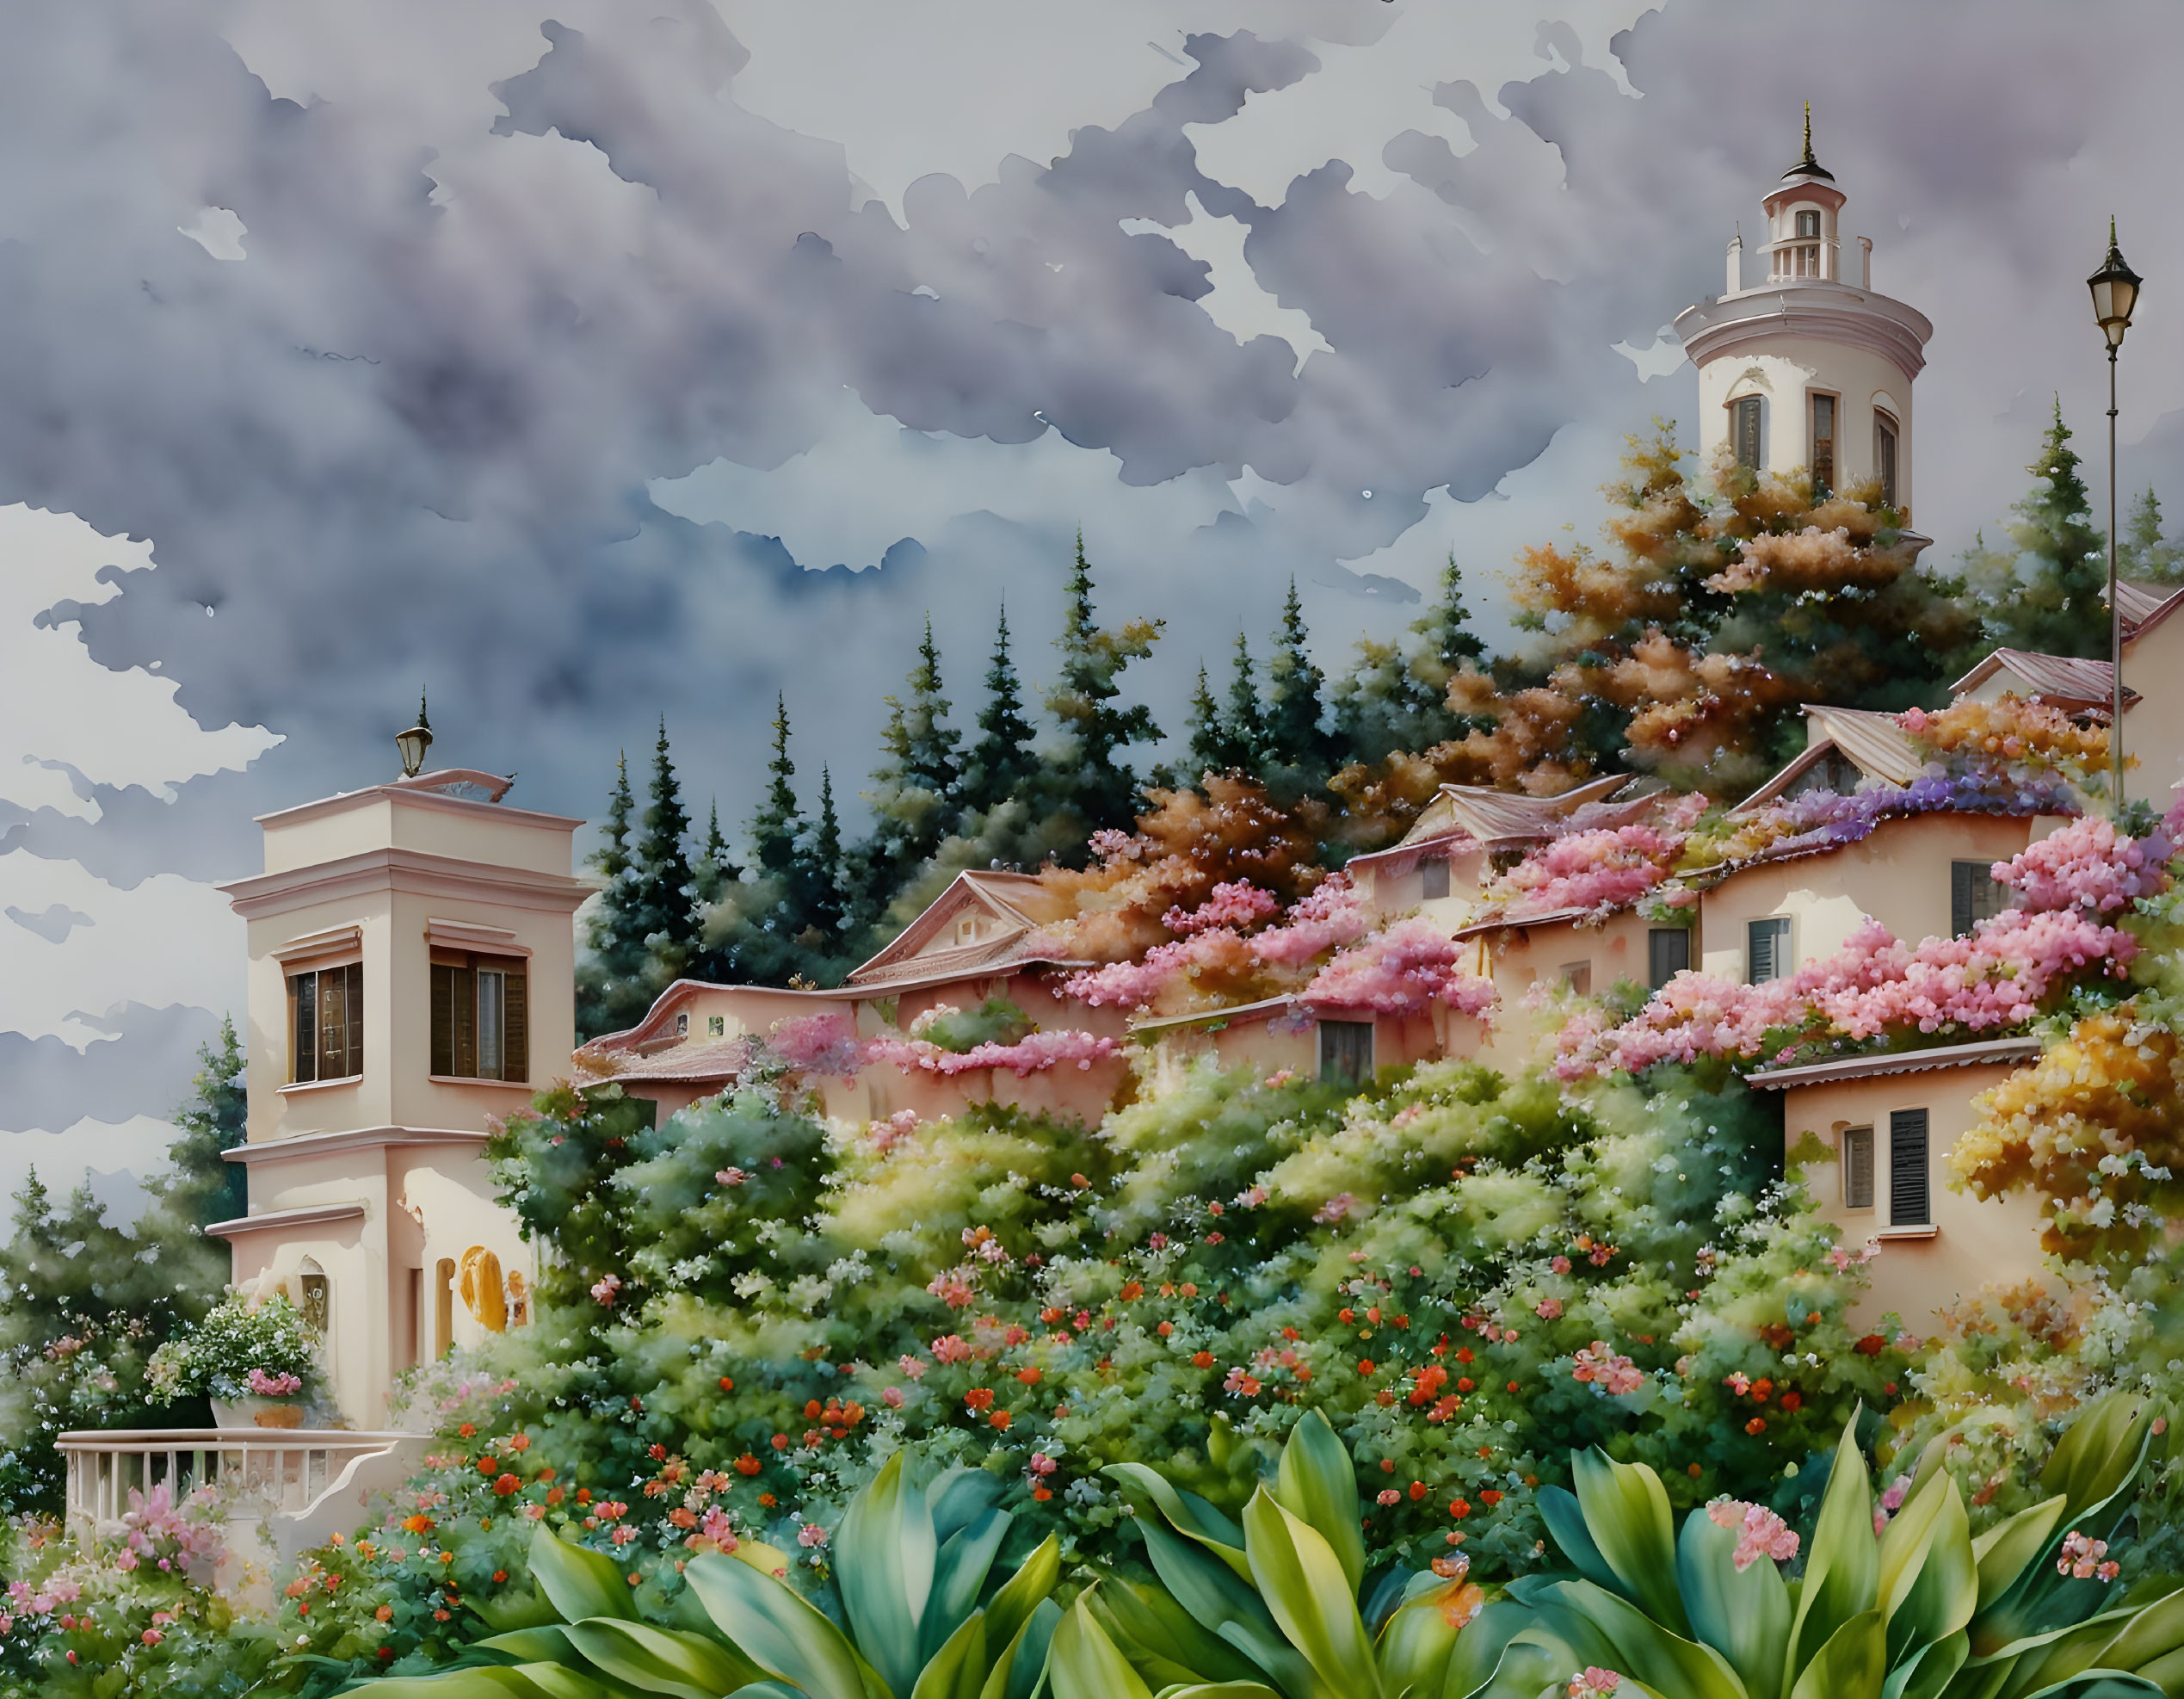 Lush garden painting with blooming flowers and classic buildings under dramatic sky